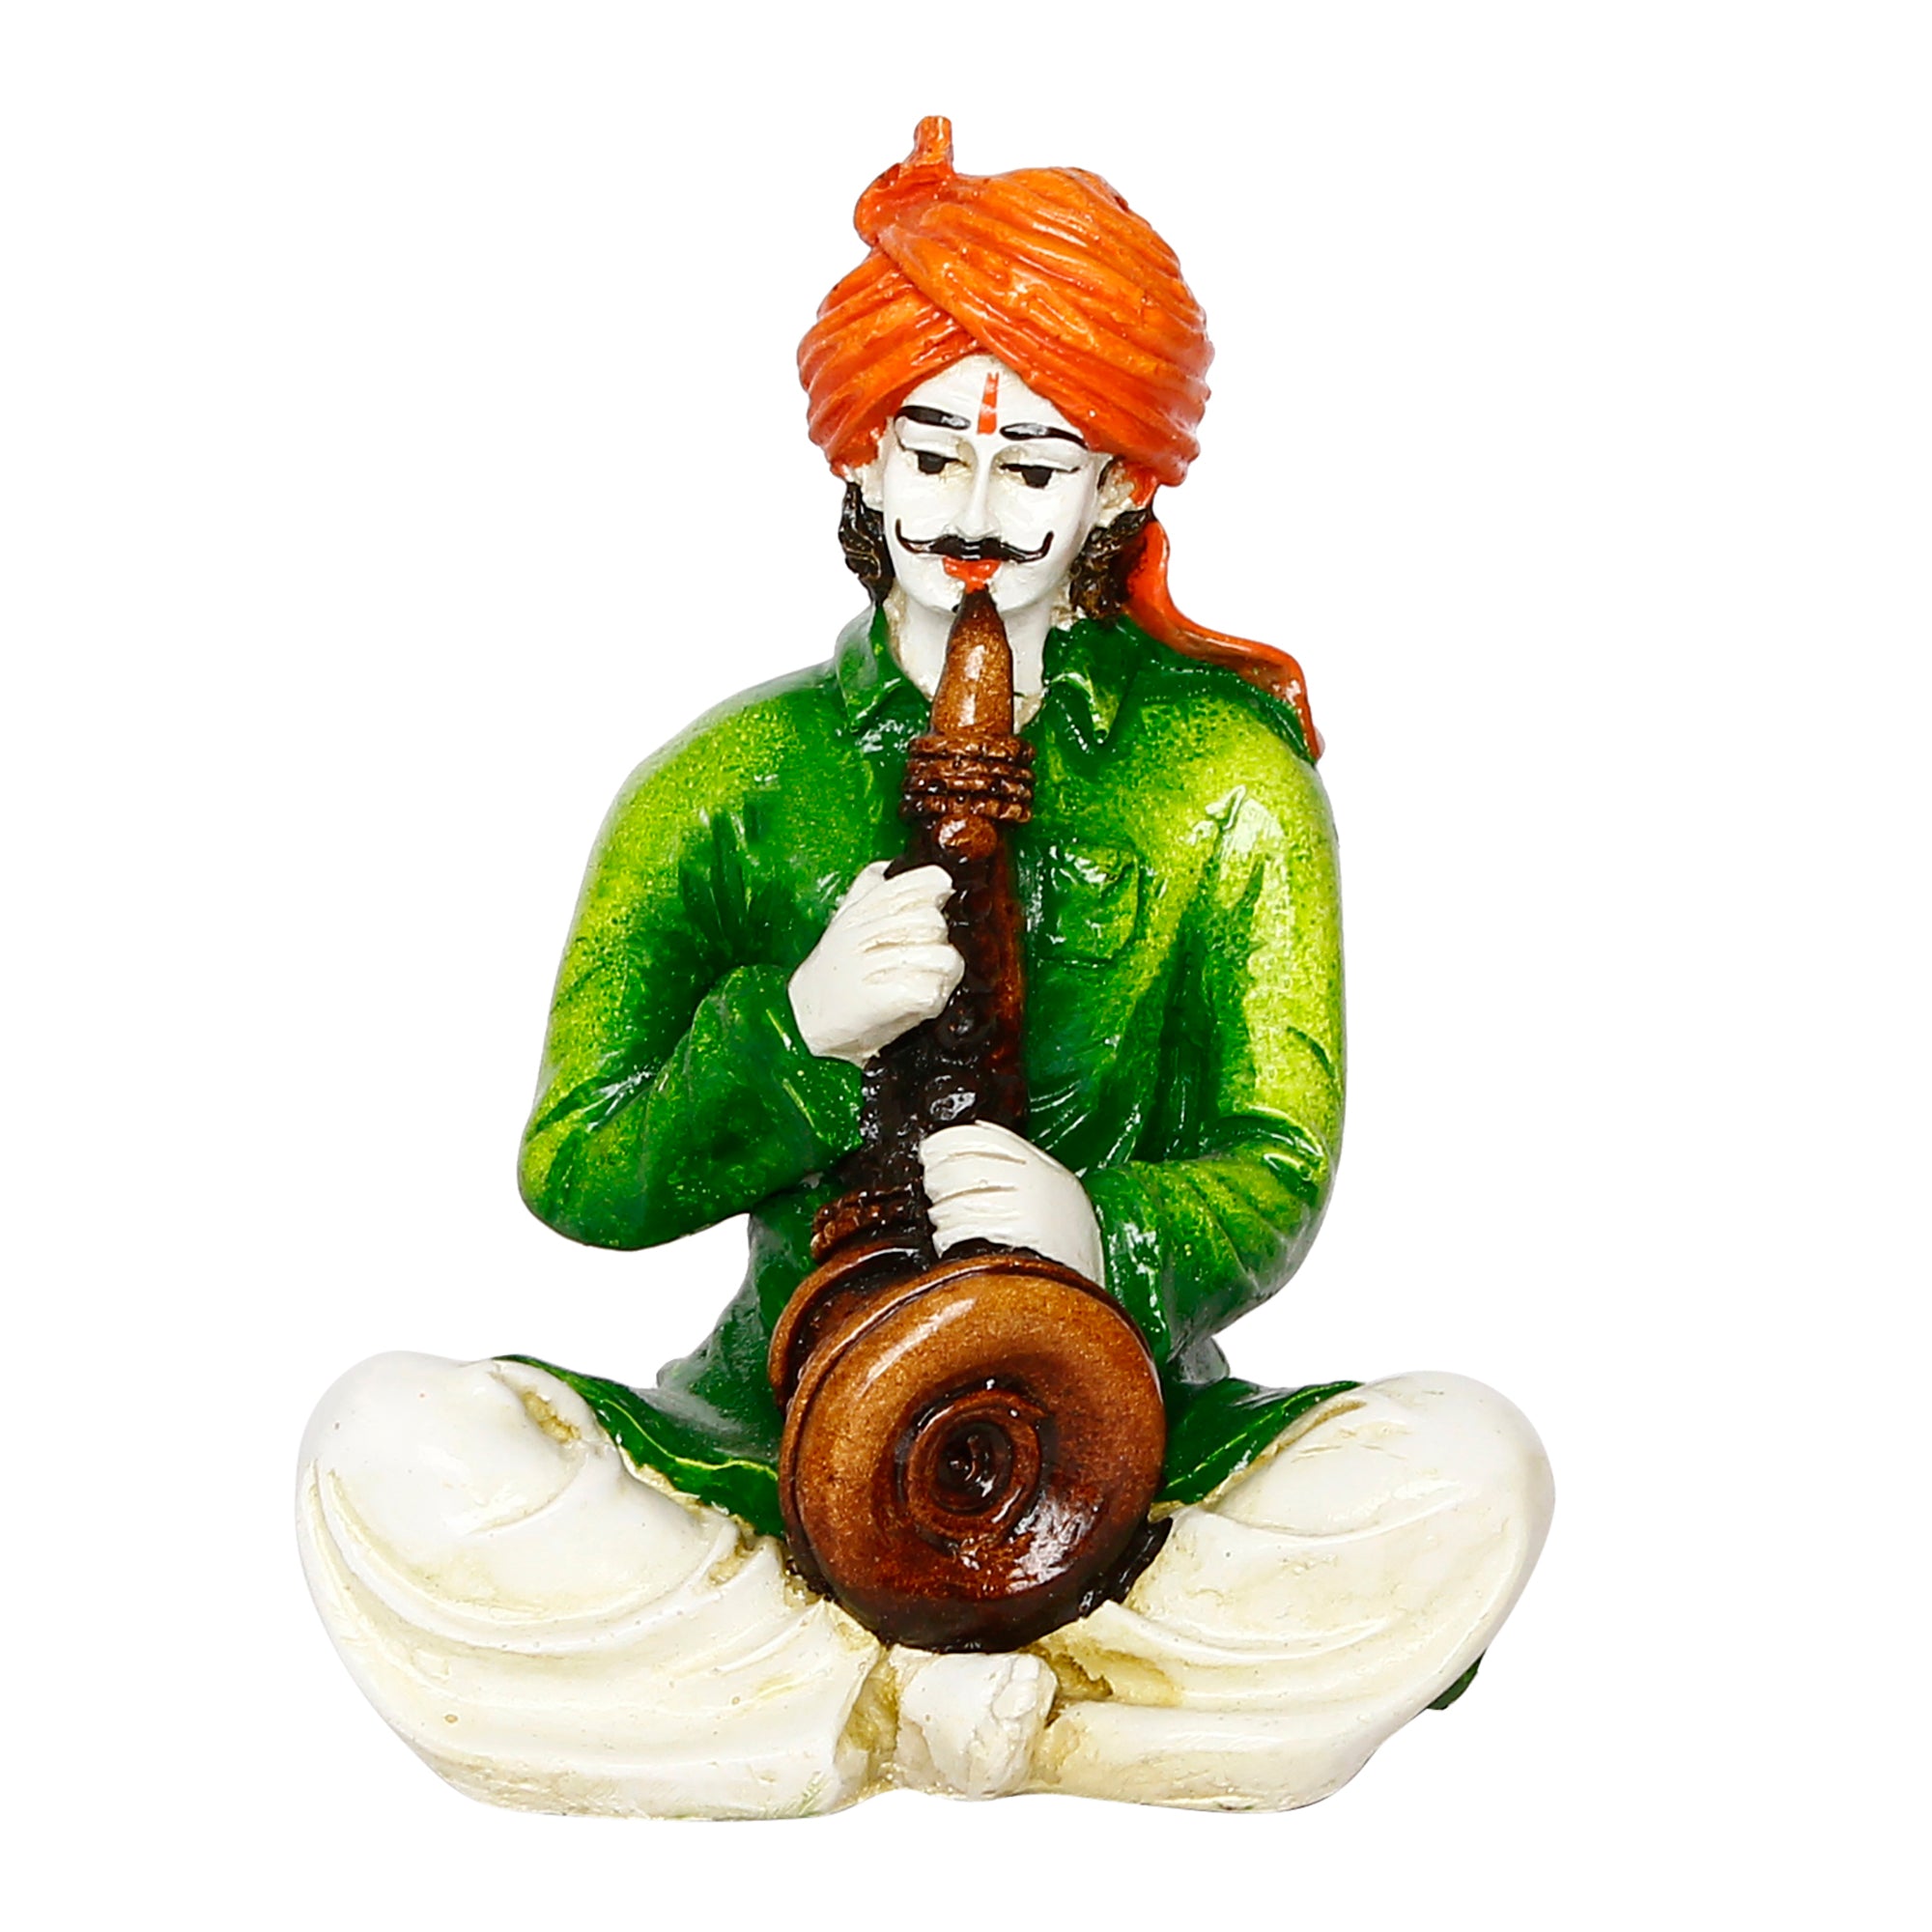 Polyresin Rajasthani Musician Men Statue Playing Musical Instrument Human Figurines Home Decor Showpiece 4